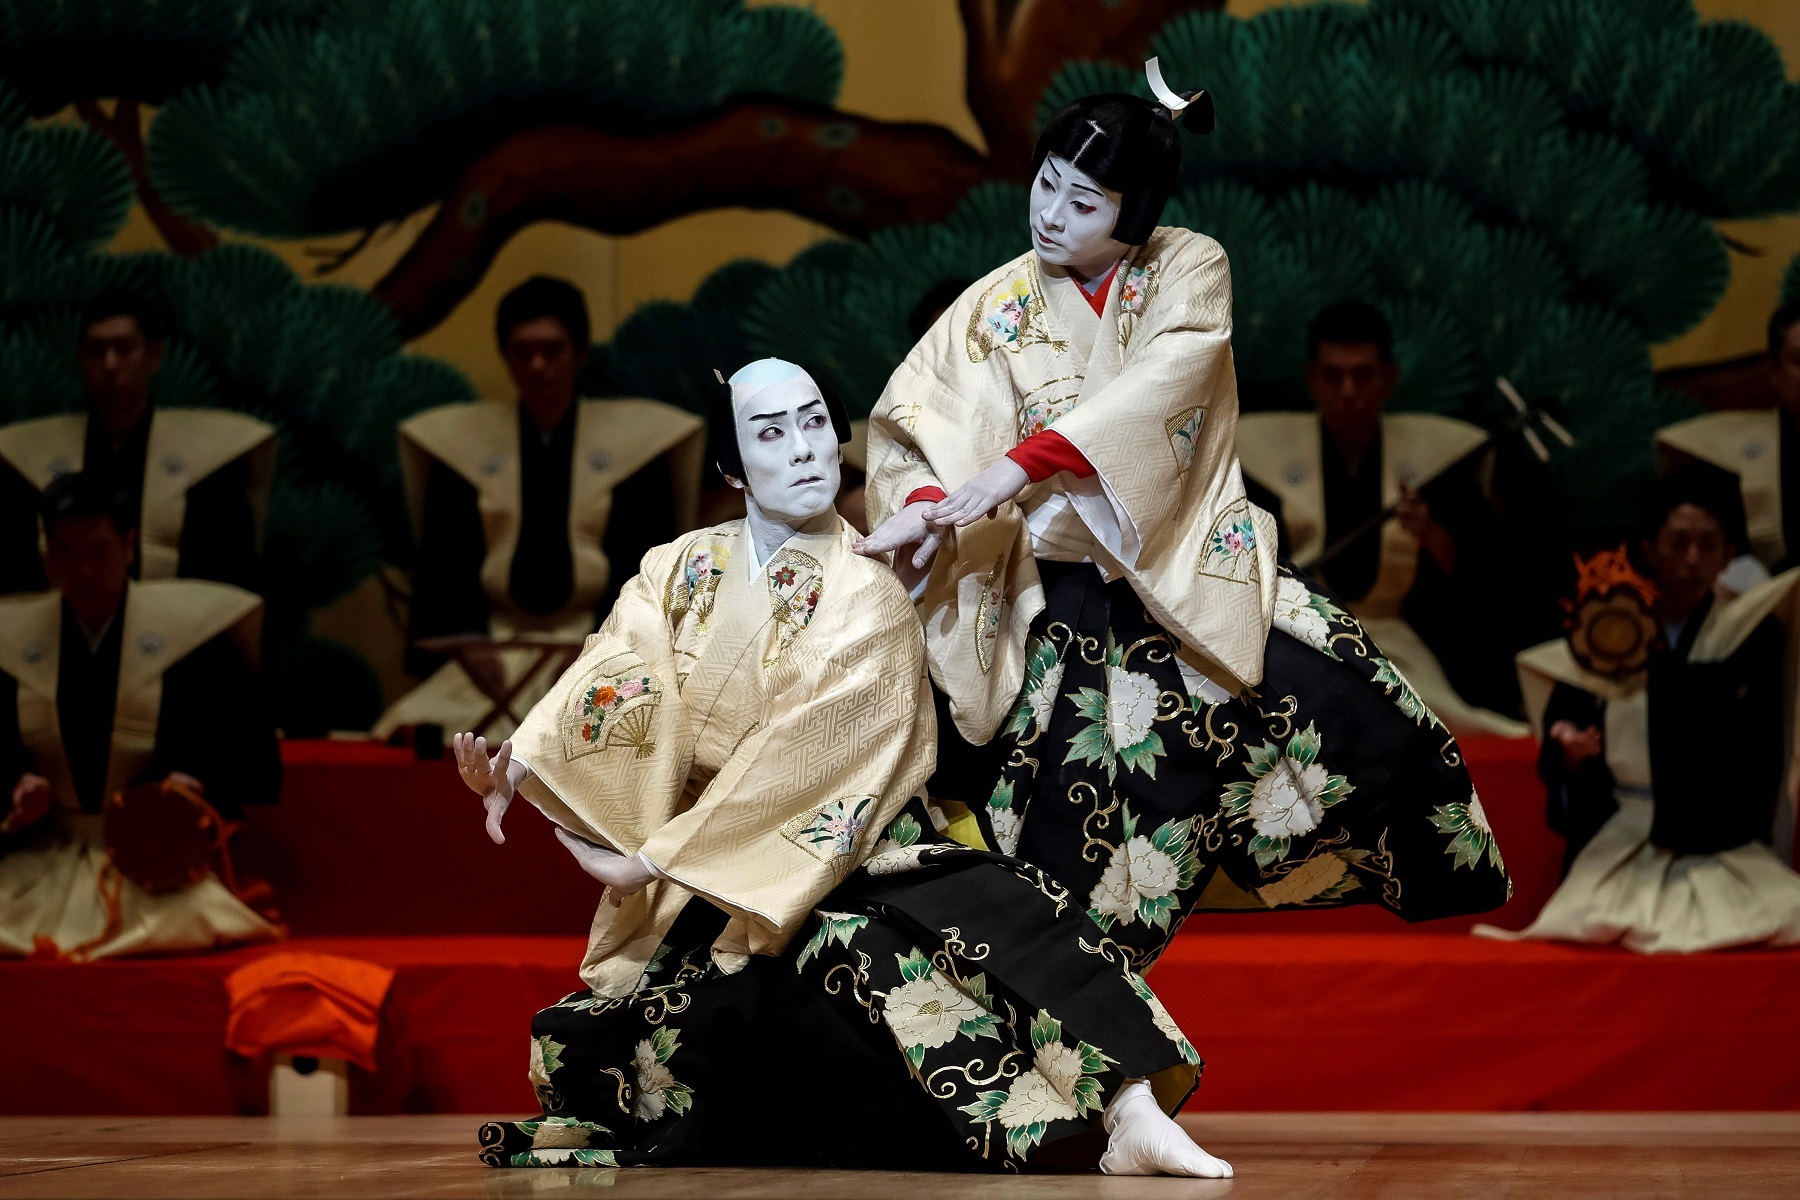 <p>If you’re visiting Japan to discover its rich cultural heritage, a night at a <a href="https://www.jrailpass.com/blog/kabuki-japan">Kabuki theatre</a> is a must. This traditional dance-drama, which is recognized by UNESCO and incorporates mime, dance and music, dates back to the early 17th century.</p><p>Characterized by the opulent costumes and dramatic makeup of its all-male cast, Kabuki <a href="https://www.britannica.com/art/Kabuki">differs from other Japanese performance styles</a> by being initially aimed at the working classes rather than nobility. It remains widely popular across Japan today. </p>